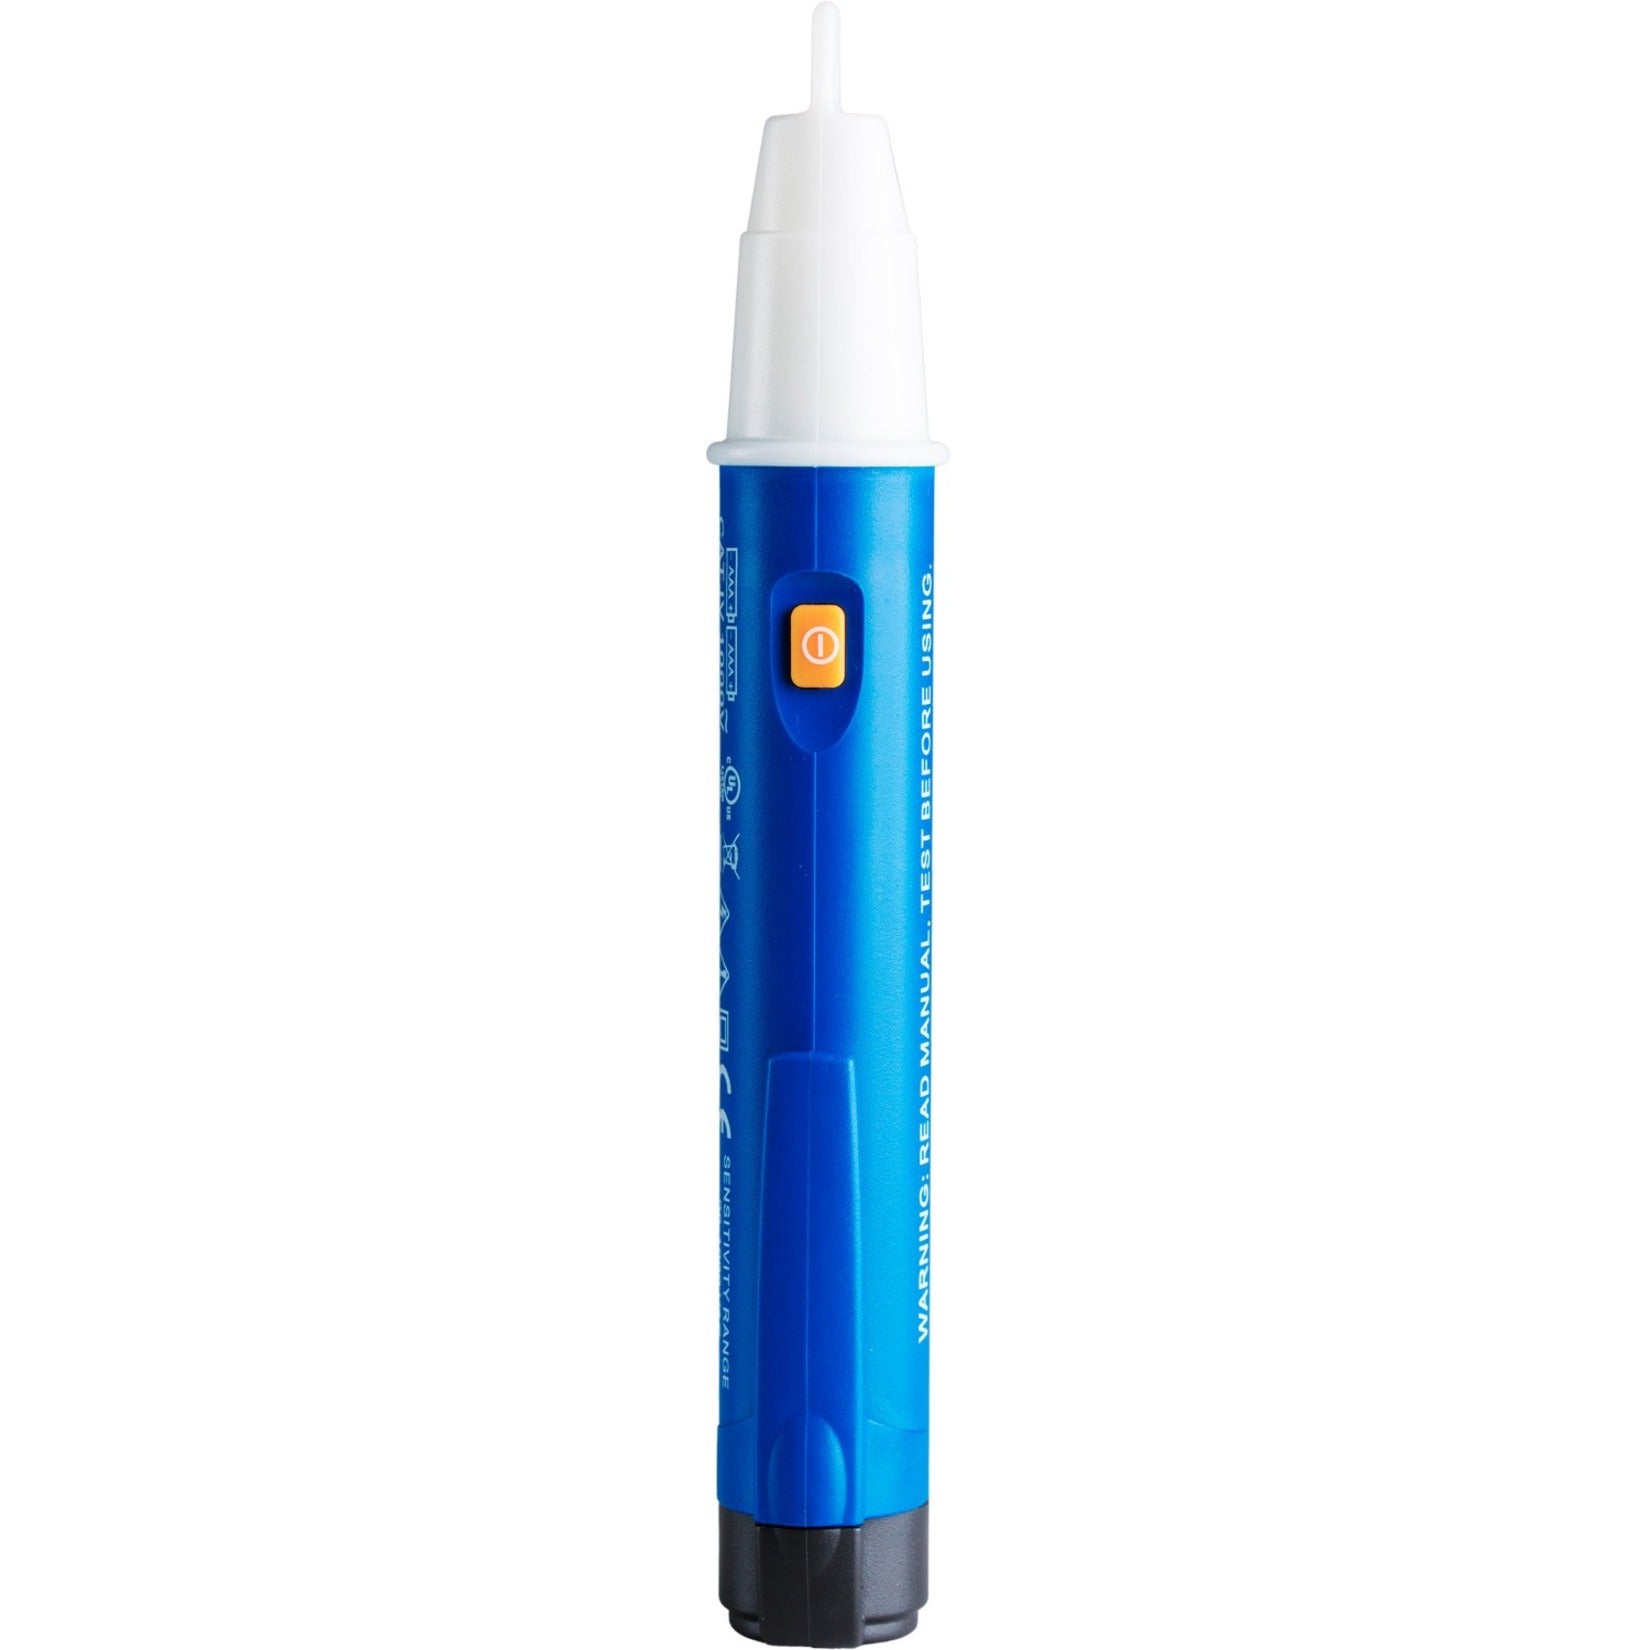 Jonard Tools VT-1100 Voltage Detector Device, Battery Included, Voltage Monitor, Frequency Measurement, Cable Testing